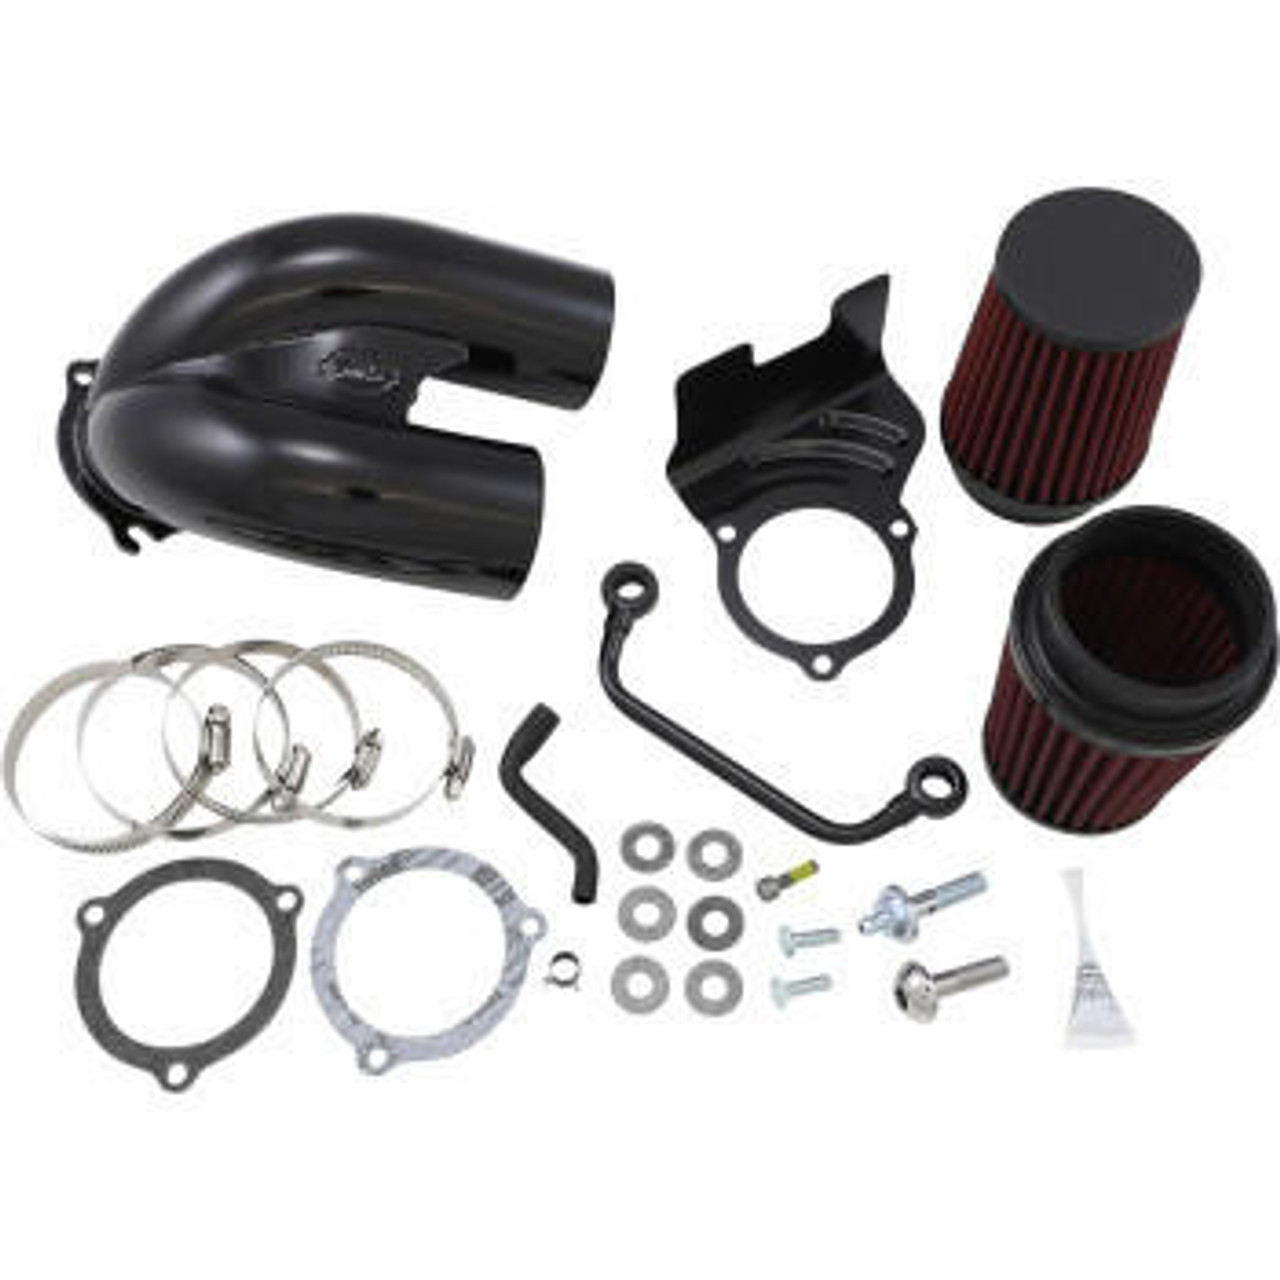 S&S Cycle - Black Tuned Induction Air Cleaner Kit fits '08-'16 Touring,  '16-'17 Softail Models